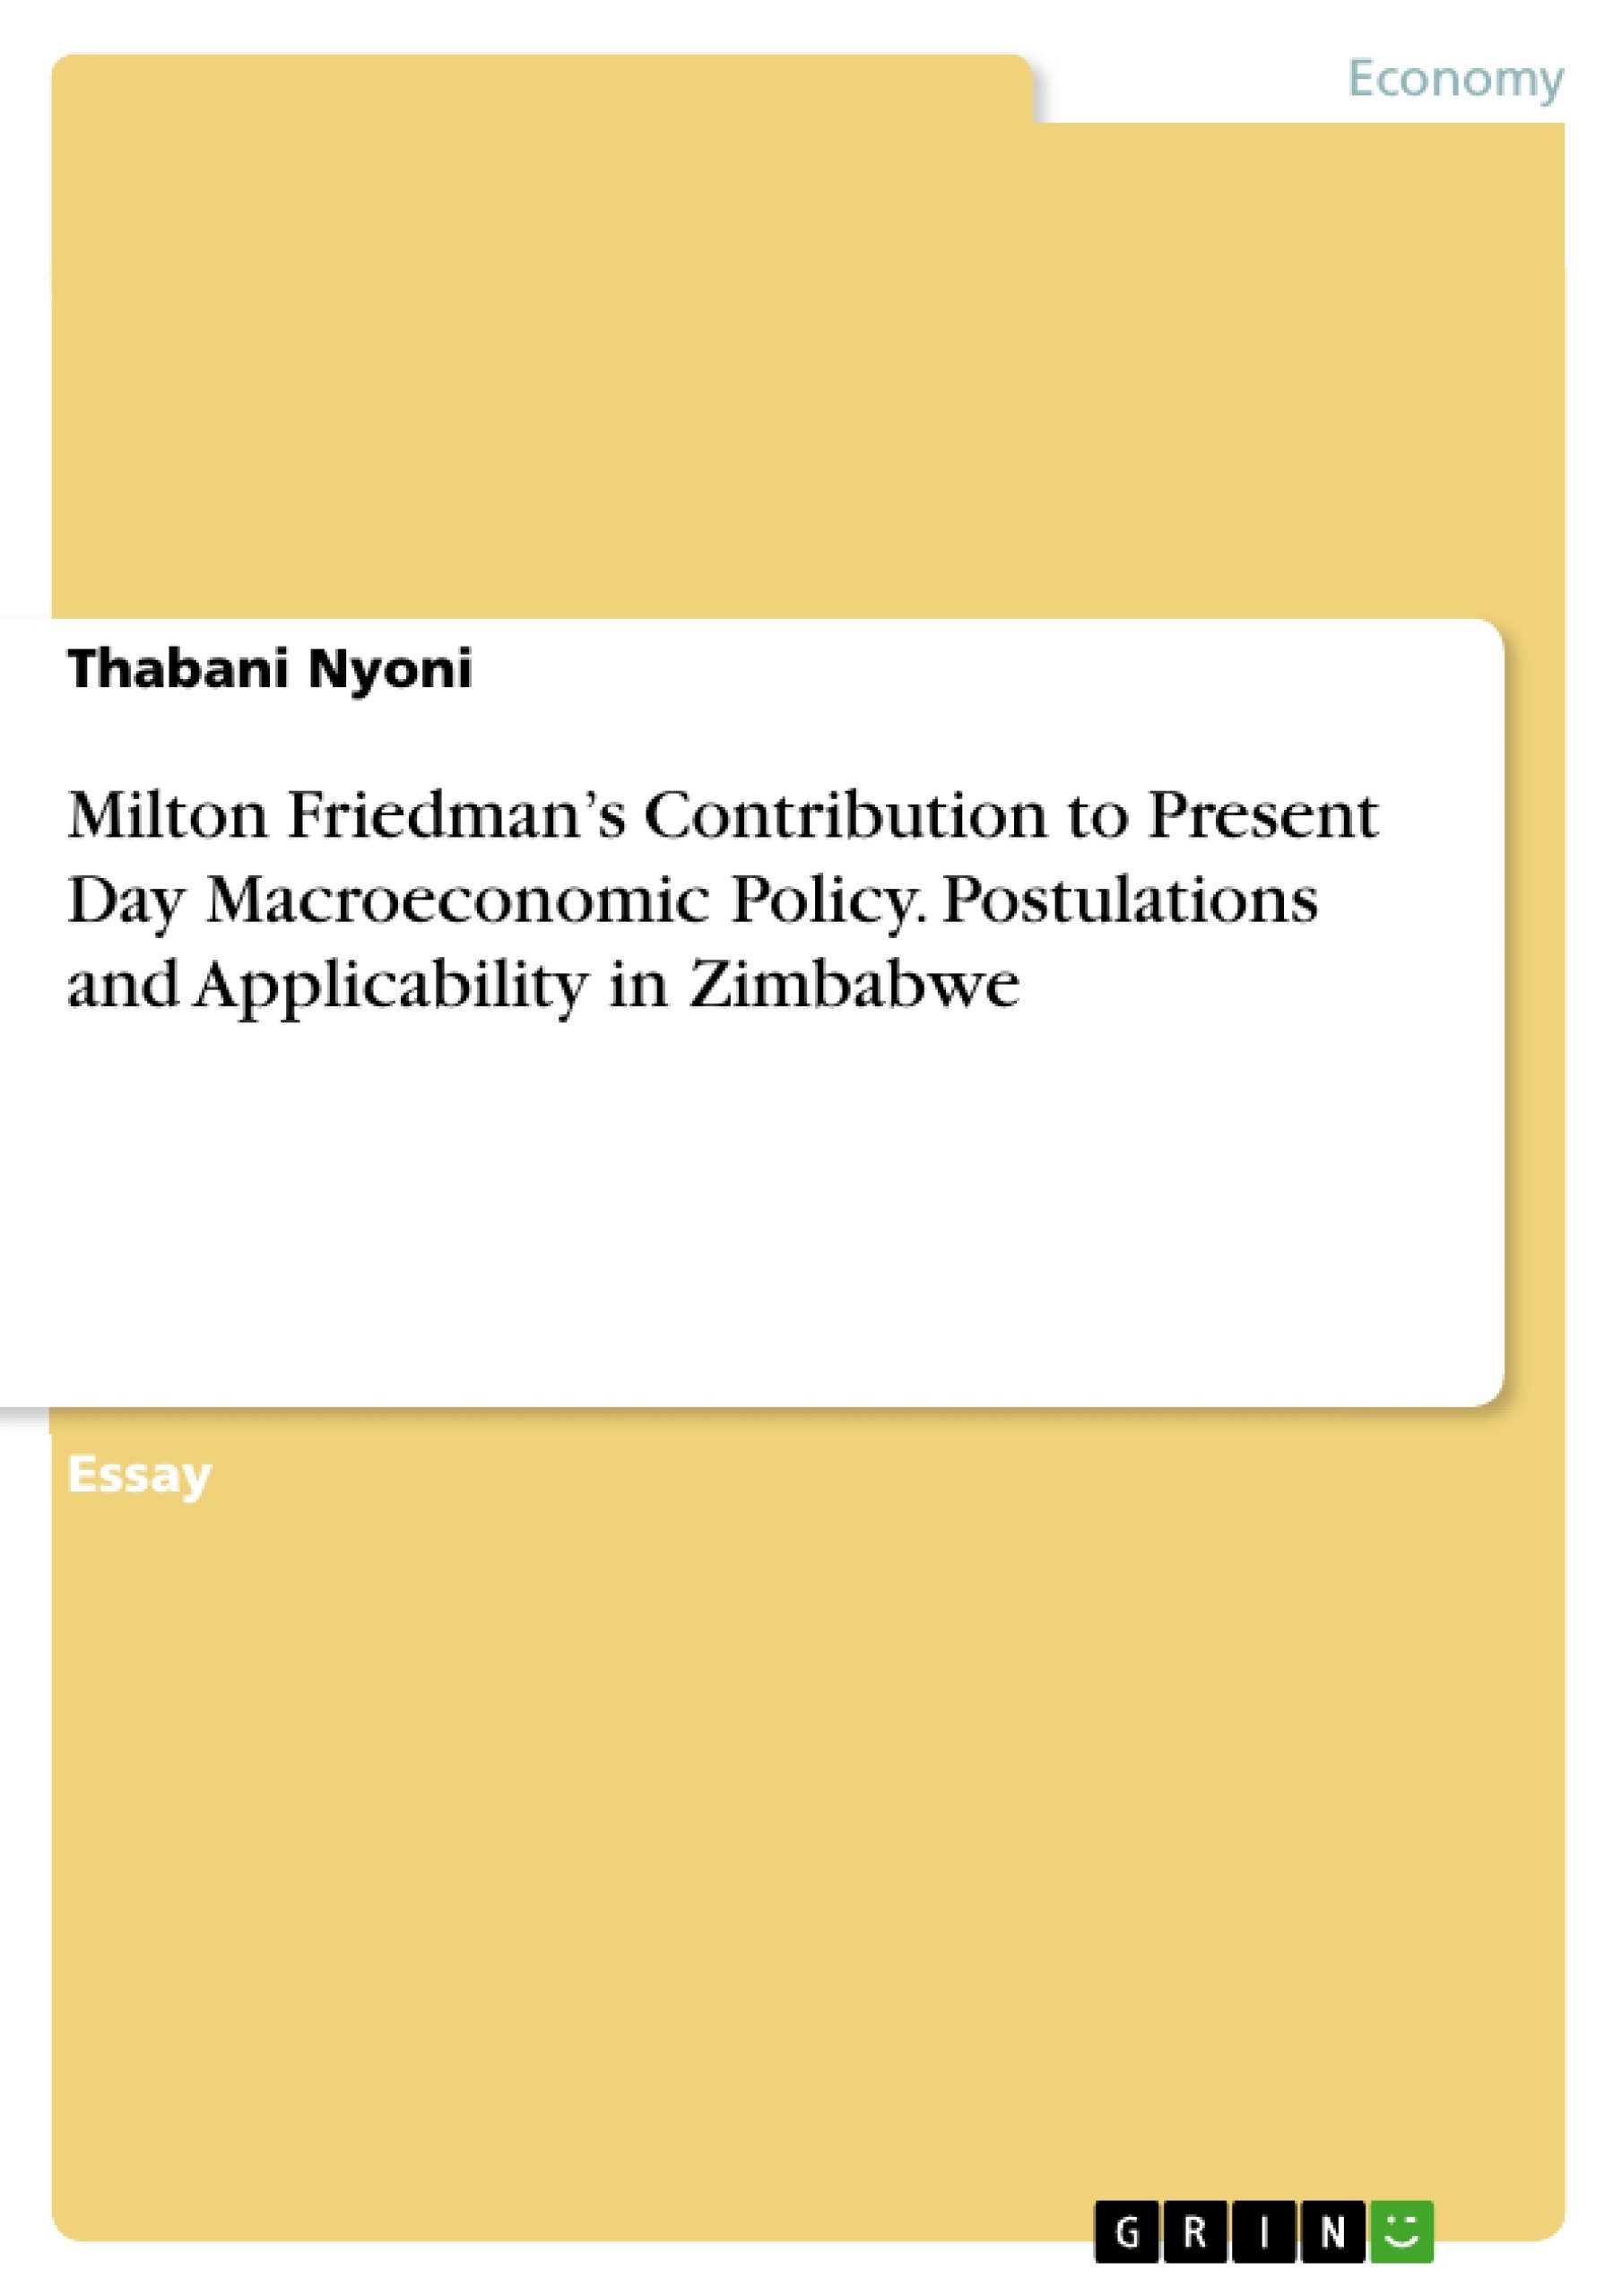 Titre: Milton Friedman’s Contribution to Present Day Macroeconomic Policy. Postulations and Applicability in Zimbabwe